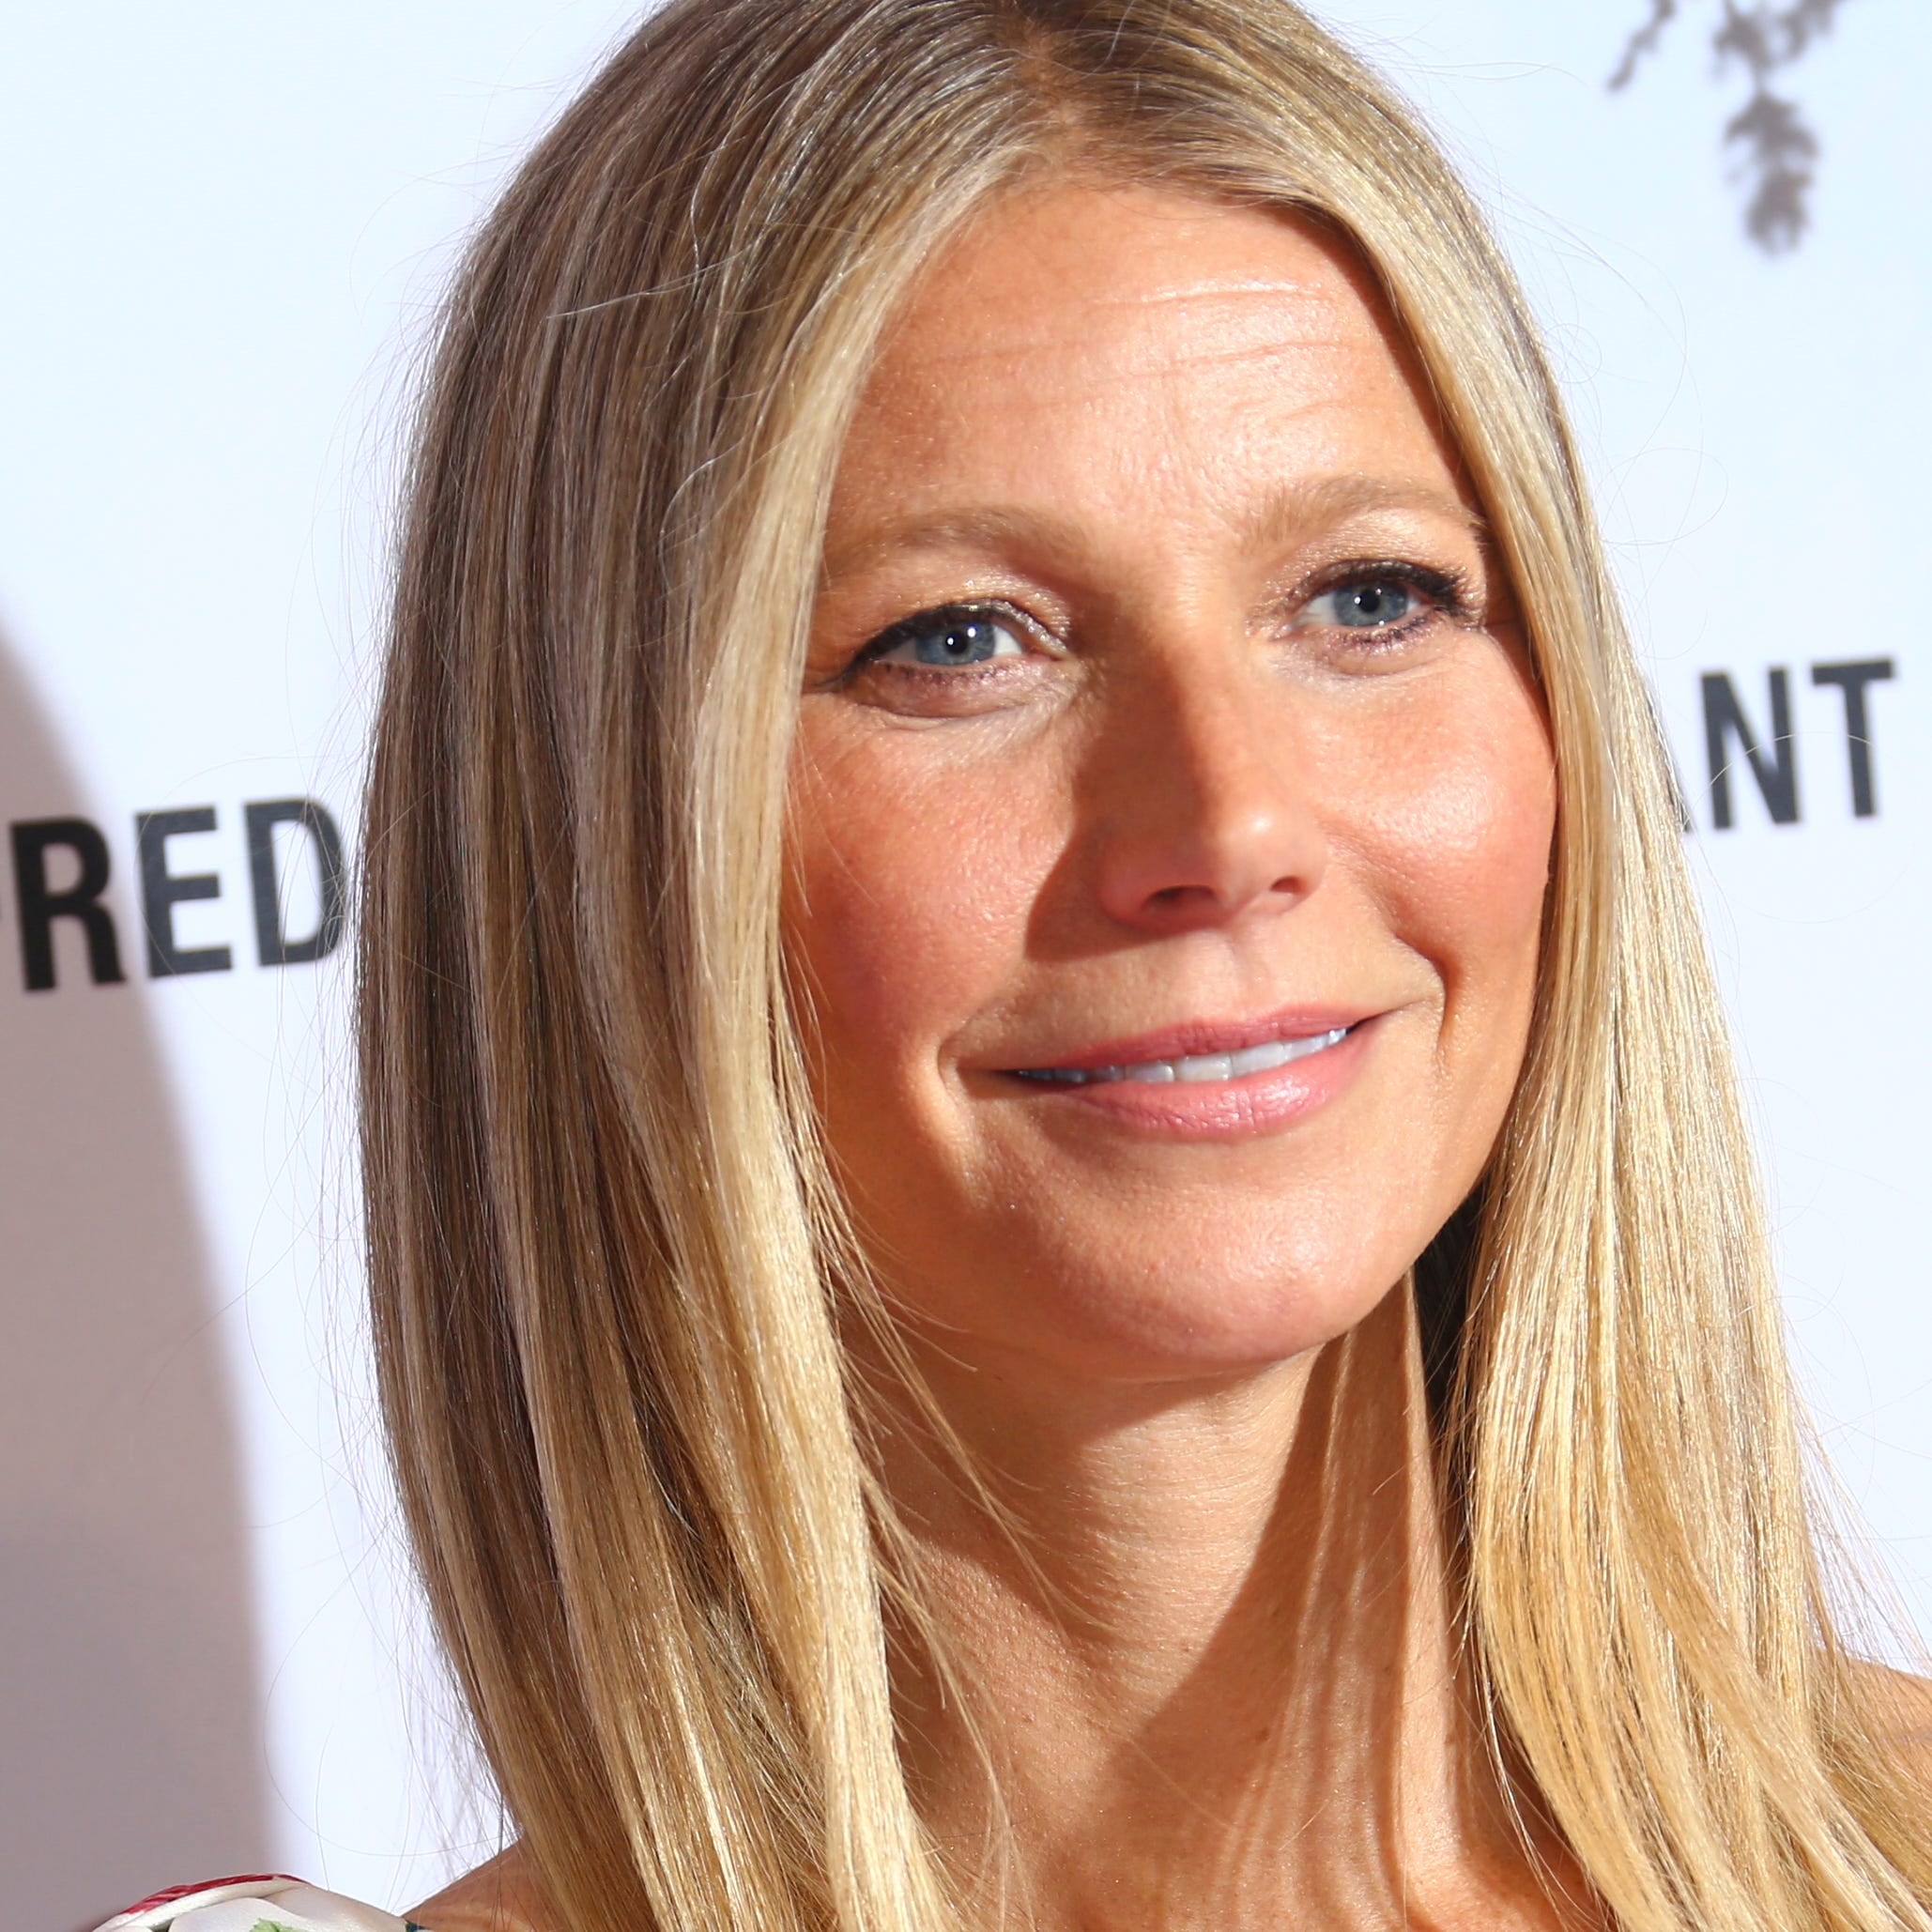 Gwyneth Paltrow reportedly tied the knot to Brad Falchuk during a private wedding ceremony in the Hamptons Saturday. The 